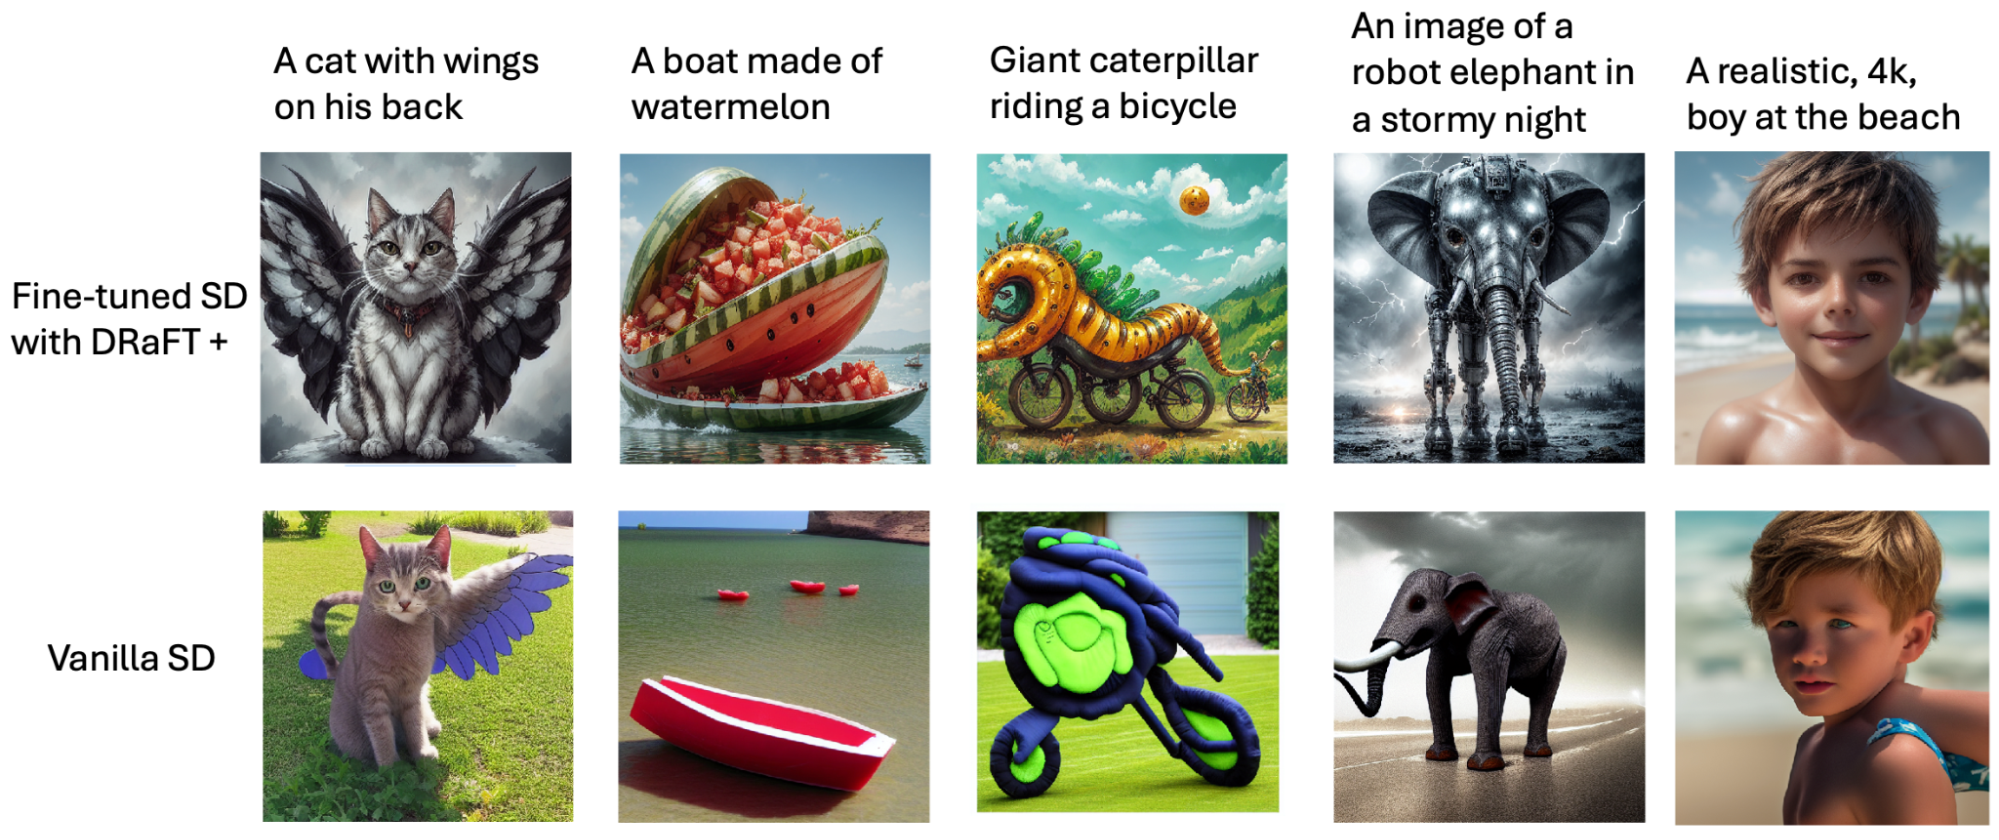 The image shows two sets of images, each set containing the same five images. The first set is labeled "Fine-tuned SD with DRaFT +" and the second set is labeled "Vanilla SD". From left to right: a cat with wings, a boat made of watermelon, a giant caterpillar riding a bike, a robot elephant, and a boy at the beach.